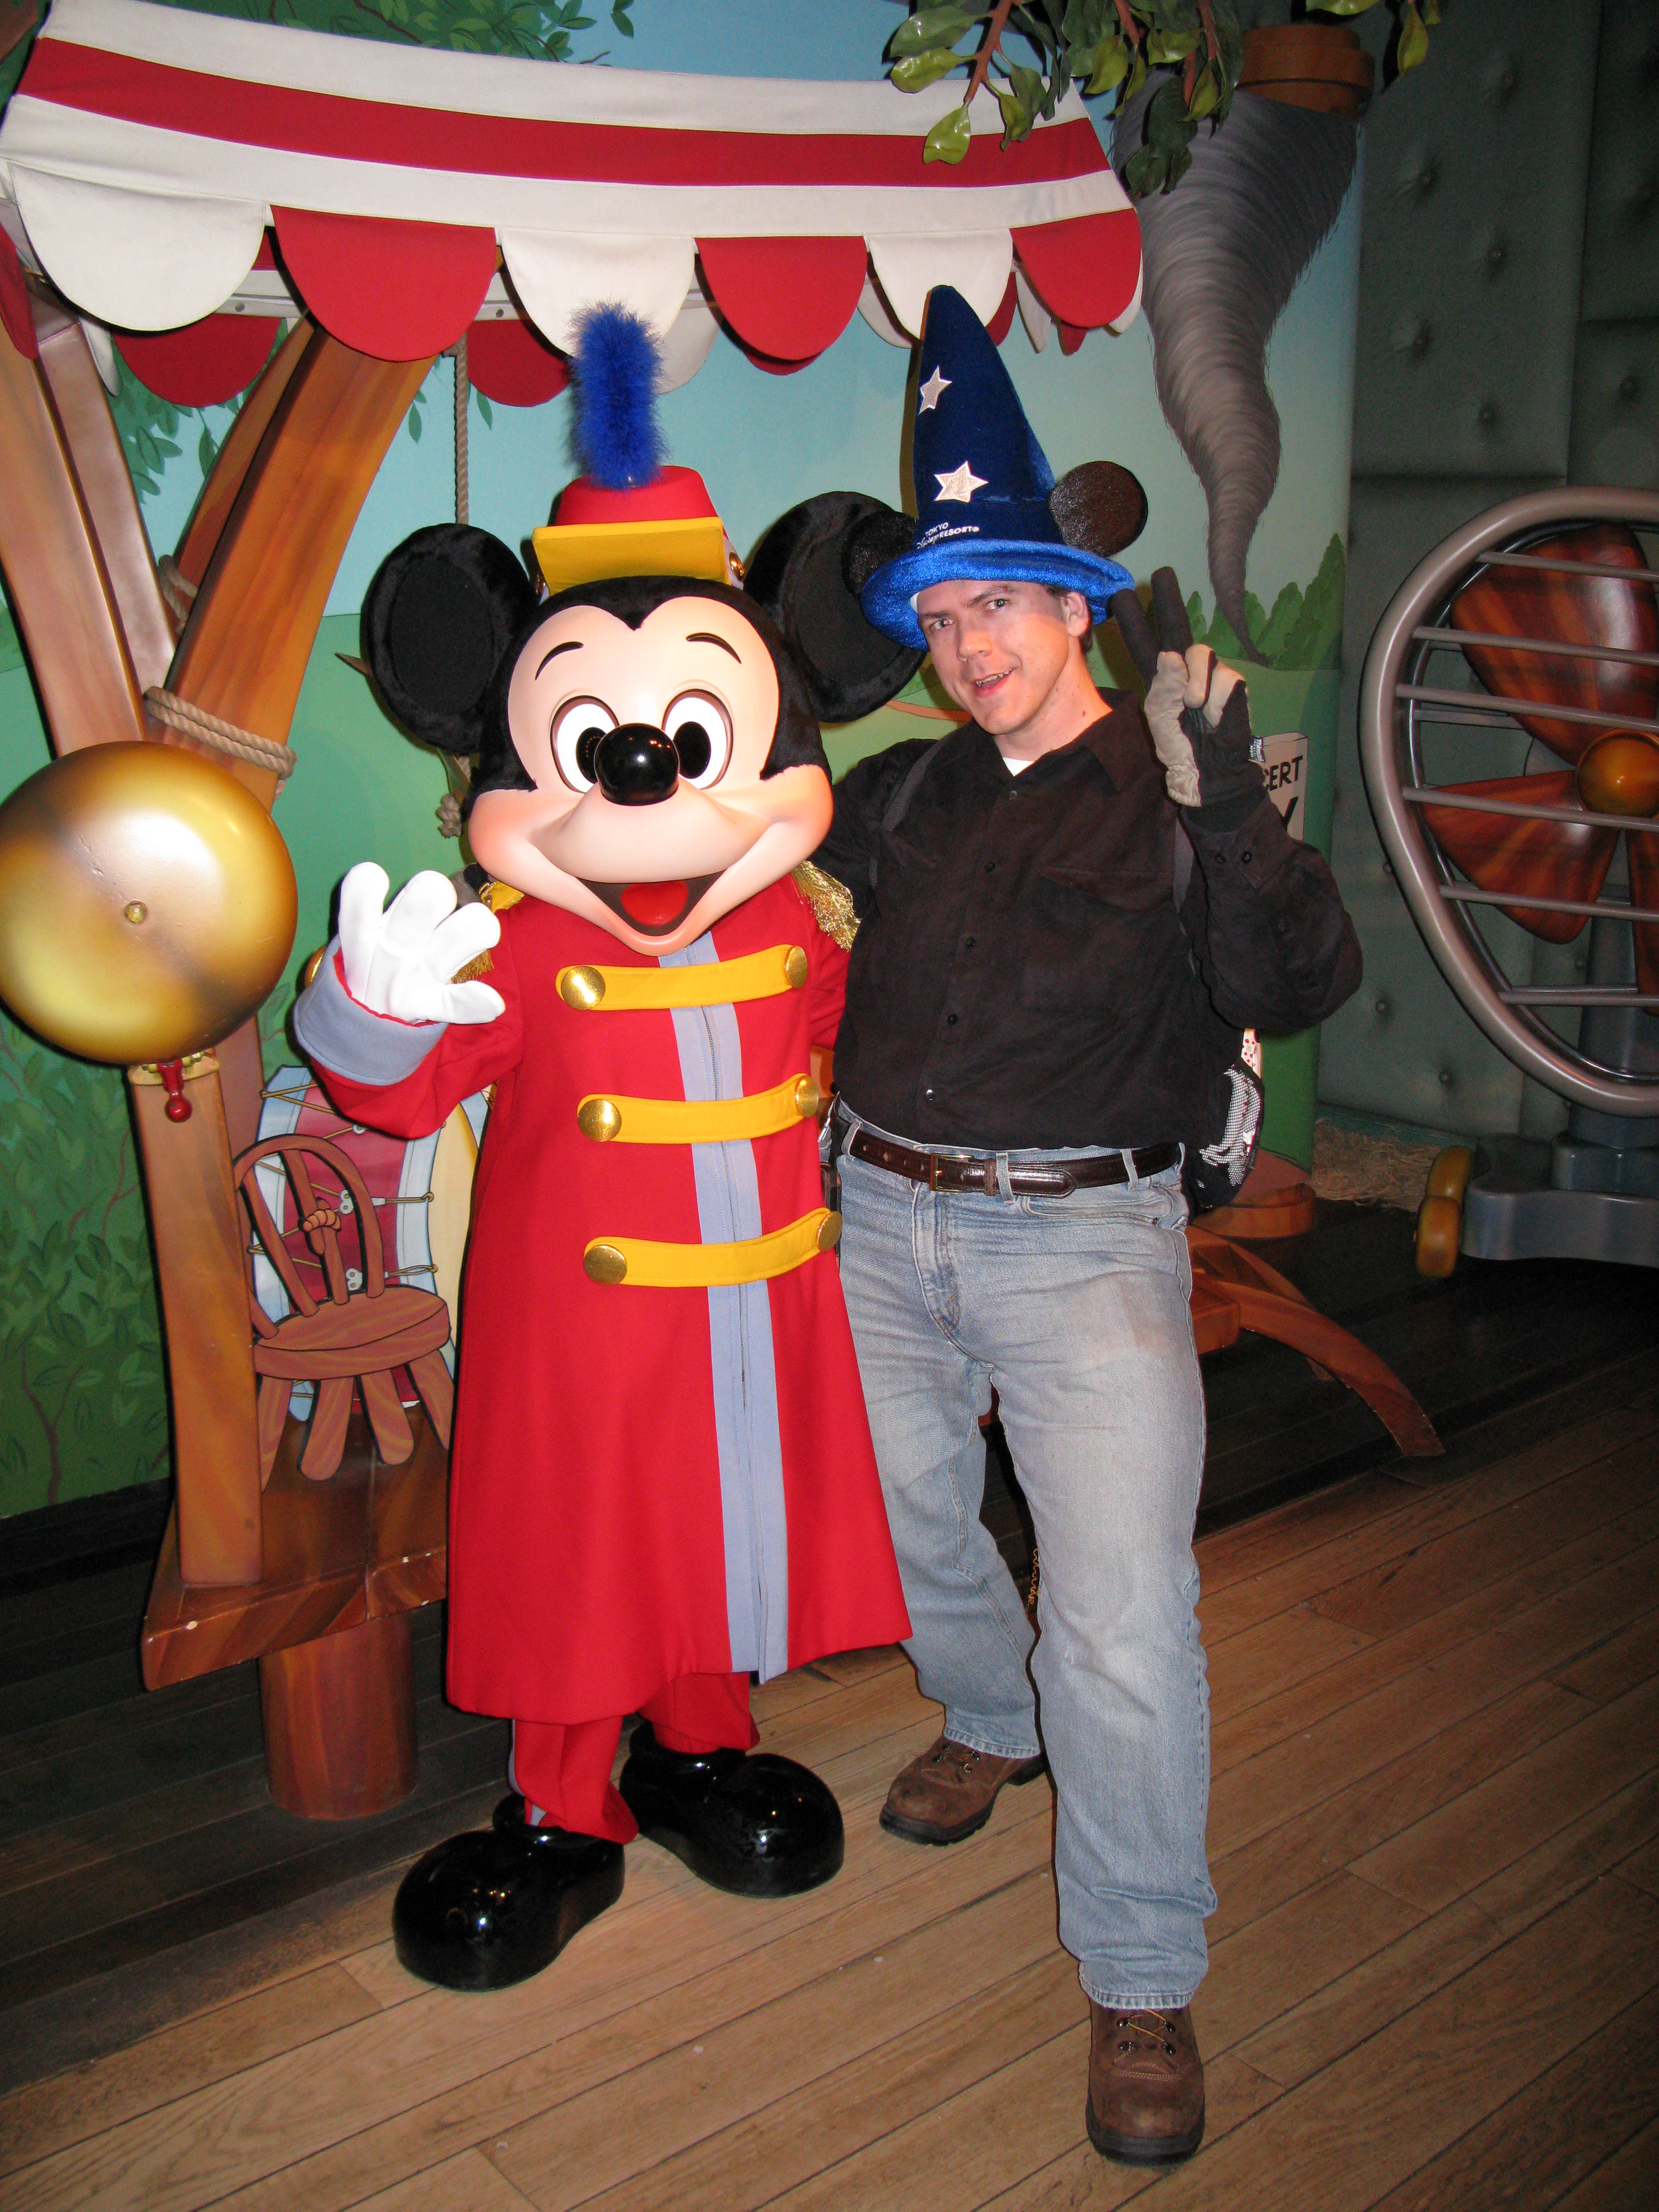 Meeting with Mickey!